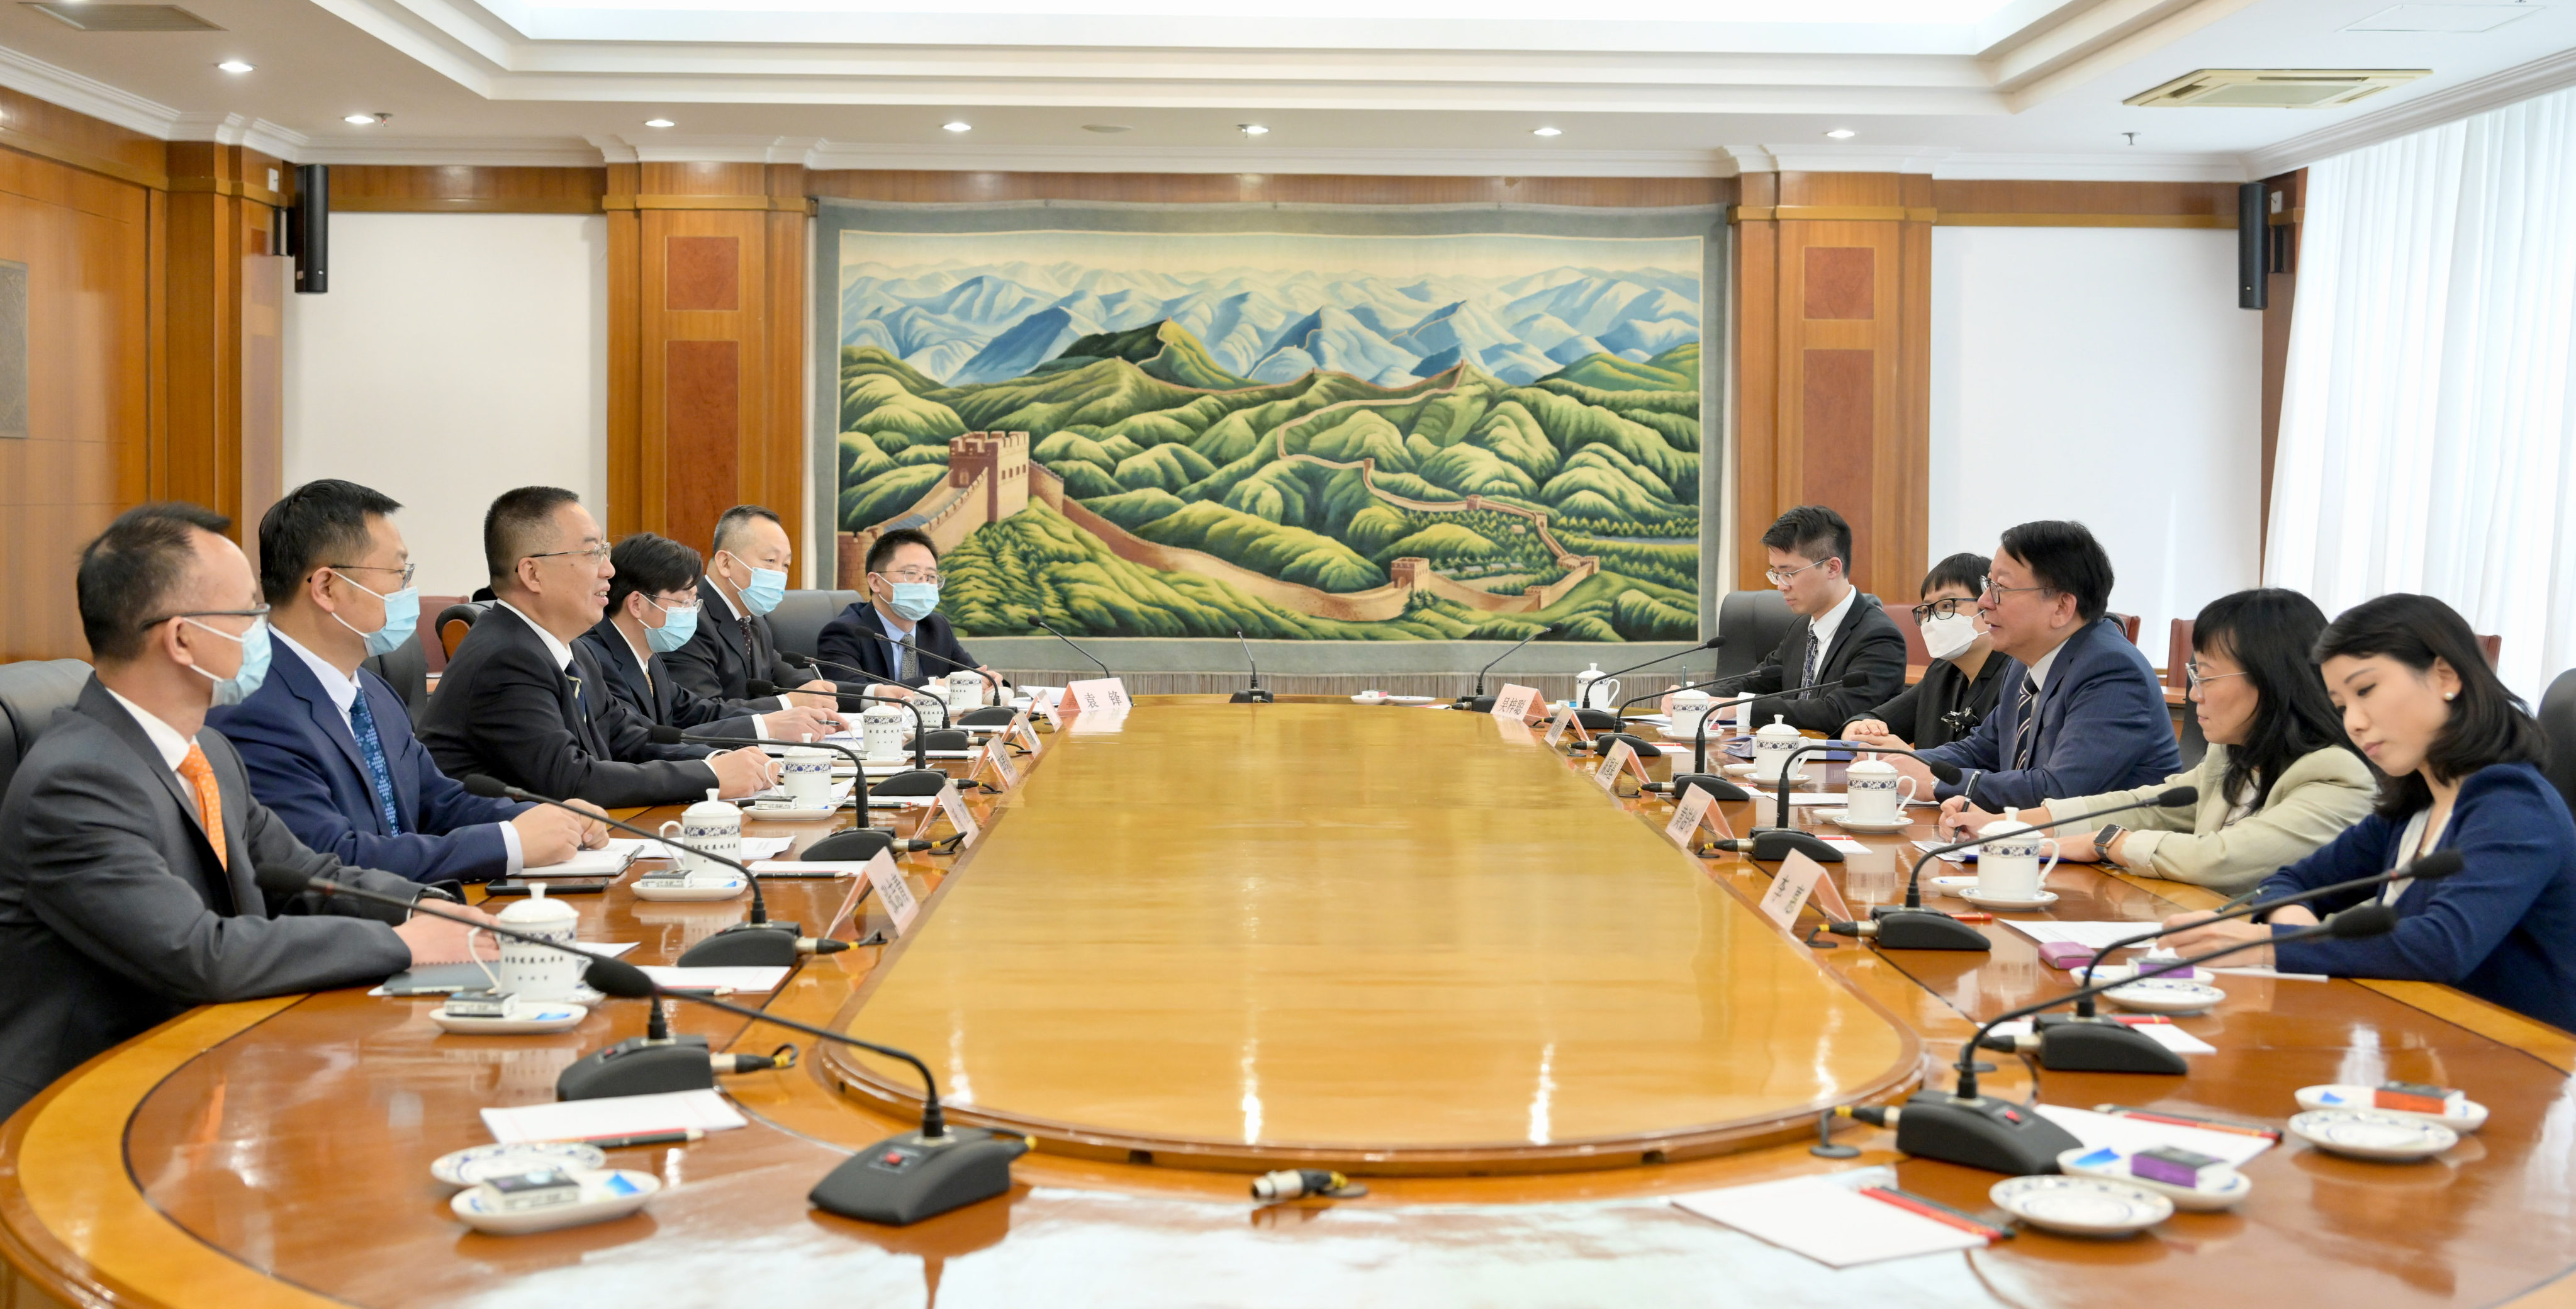 Chief Secretary Eric Chan (third right) at a meeting in Beijing as part of a working trip to the capital. Photo: Handout